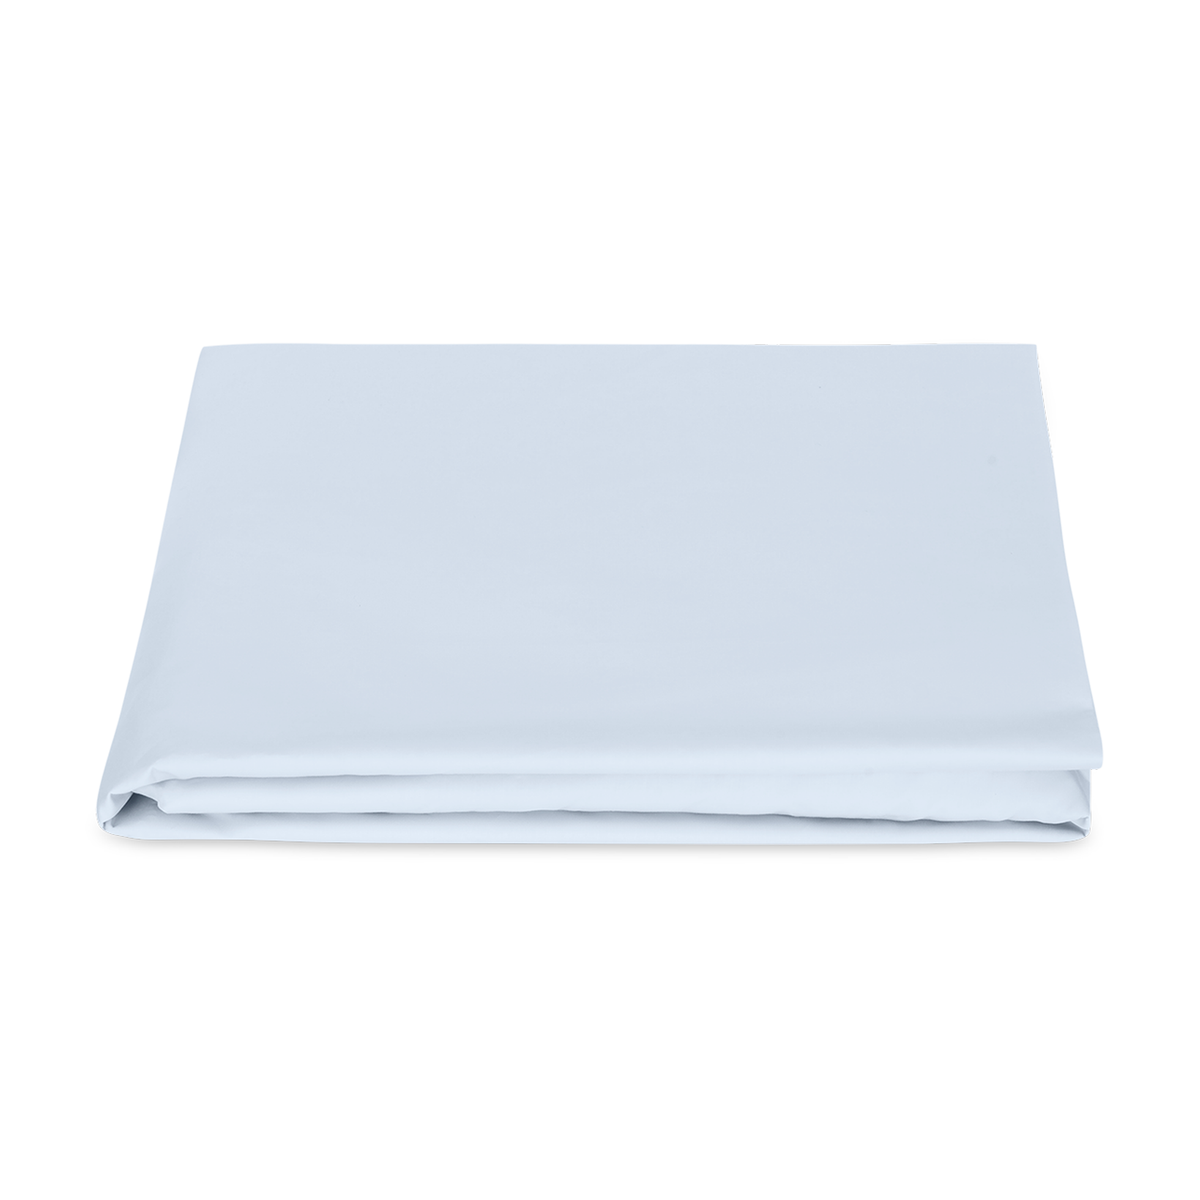 Folded Fitted Sheet of Matouk Milano Hemstitch Bedding in Color Sky